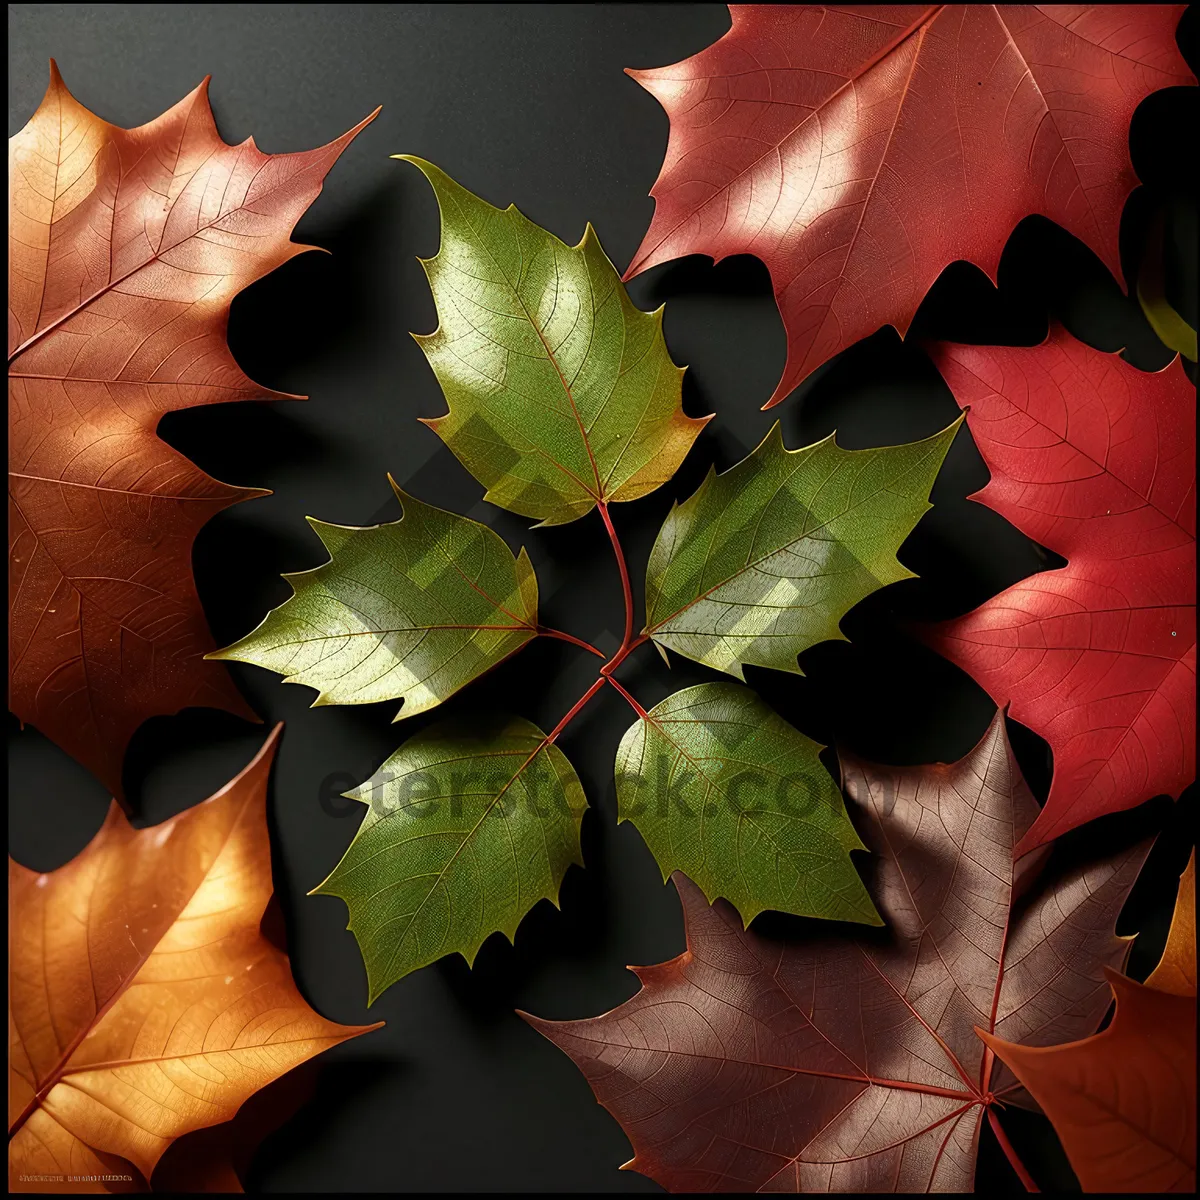 Picture of Vibrant Autumn Maple Leaf on Woody Plant